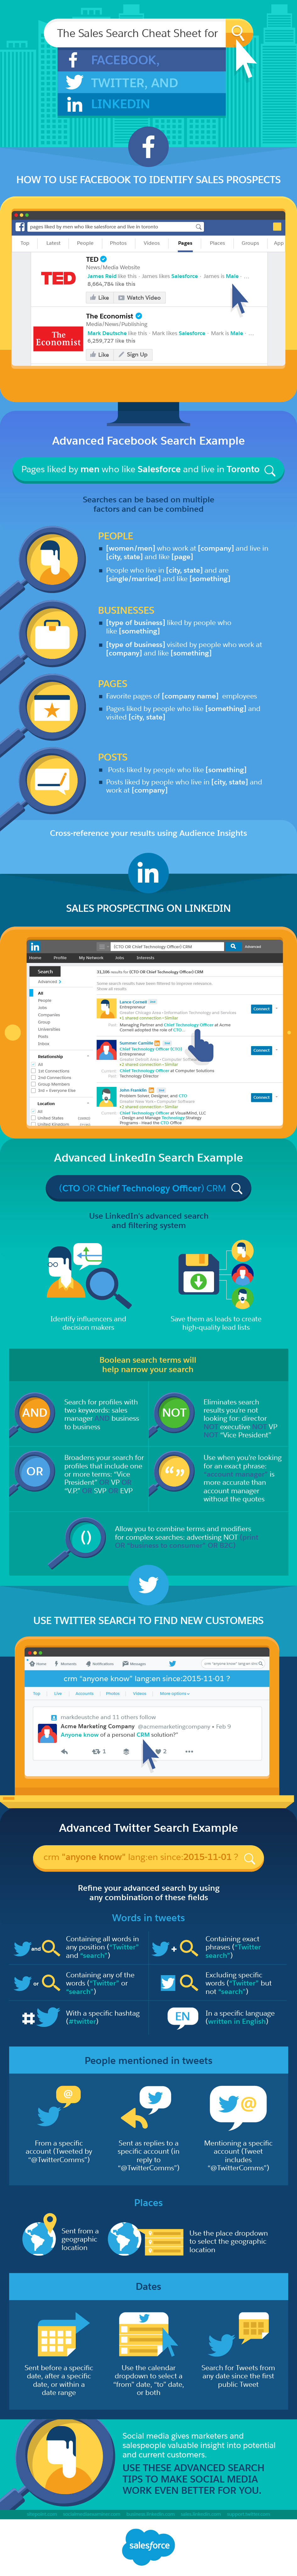 The Sales Search Cheat Sheet for Facebook, Twitter, & LinkedIn